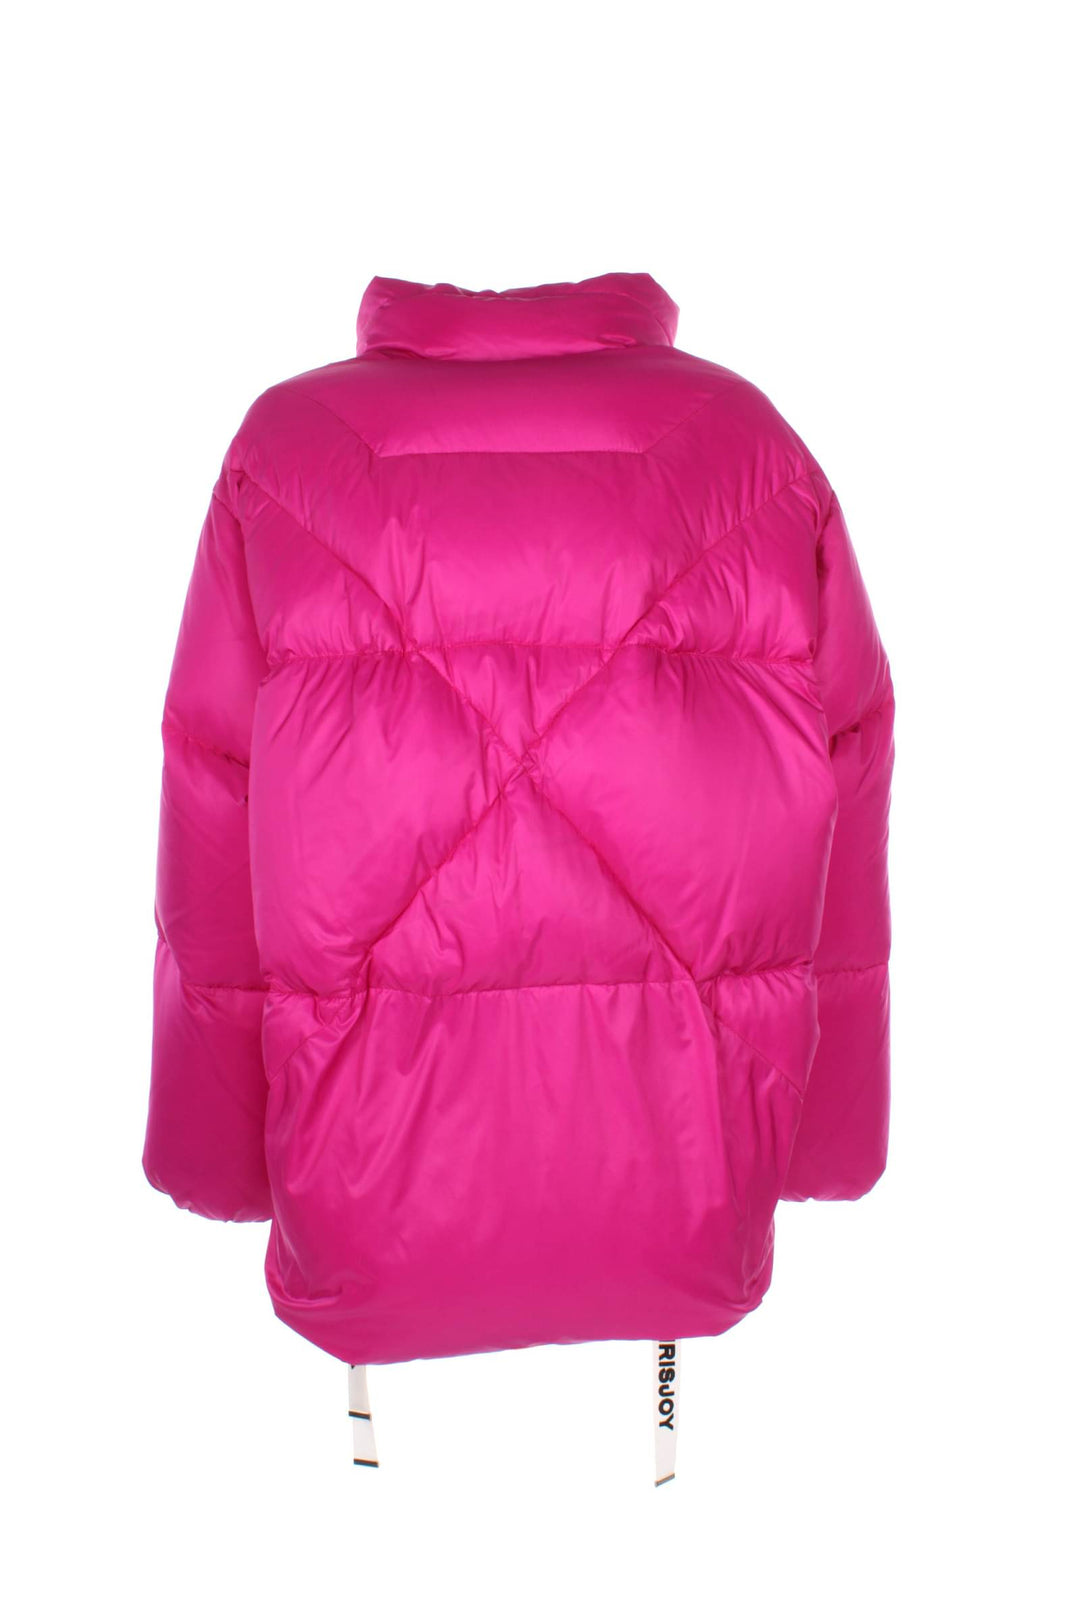 Idee Regalo Puff Oversize Bomber Poliestere Fuxia - Khrisjoy - Donna